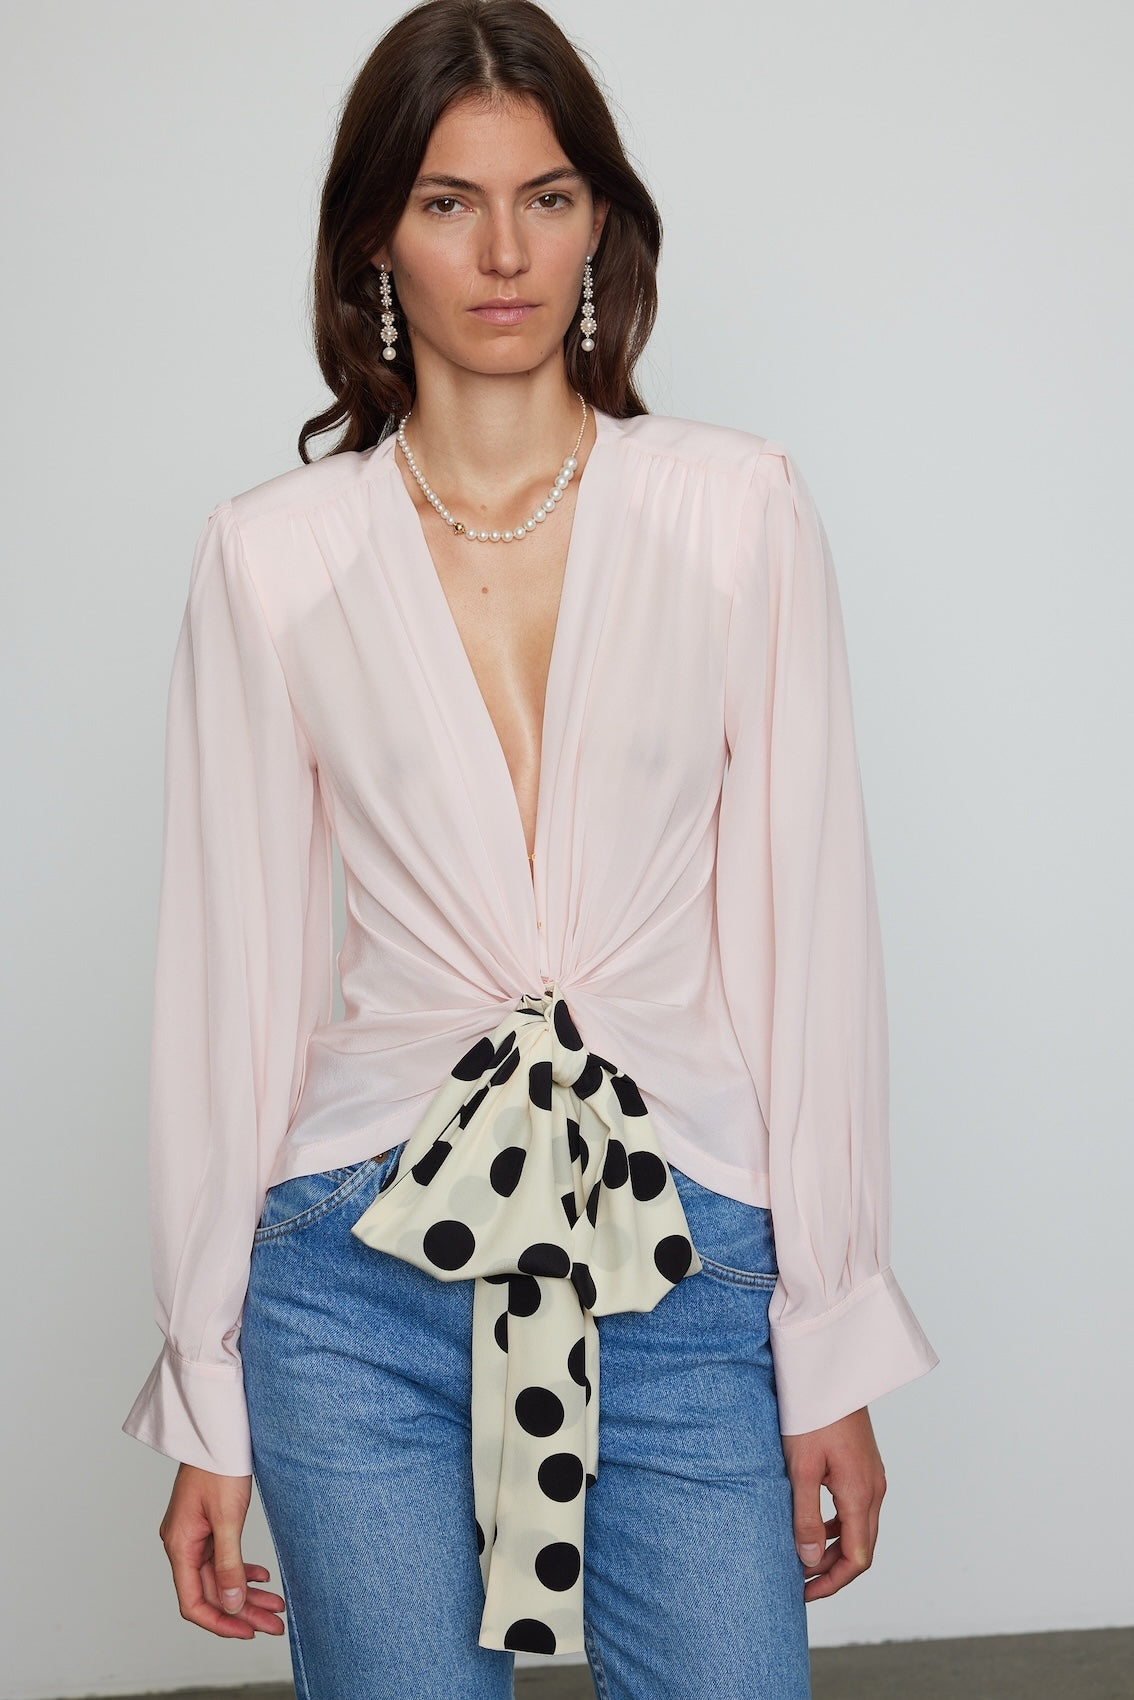 Caro Editions Our Agnete Blouse is the perfect party top, made in soft and light Silk Crepe de Chine fabric. It features a deep v-neck blouse and Caro's signature long draped sleeves. The fit is waist-accentuating while comfortable to wear.   Material: 100% Silk.